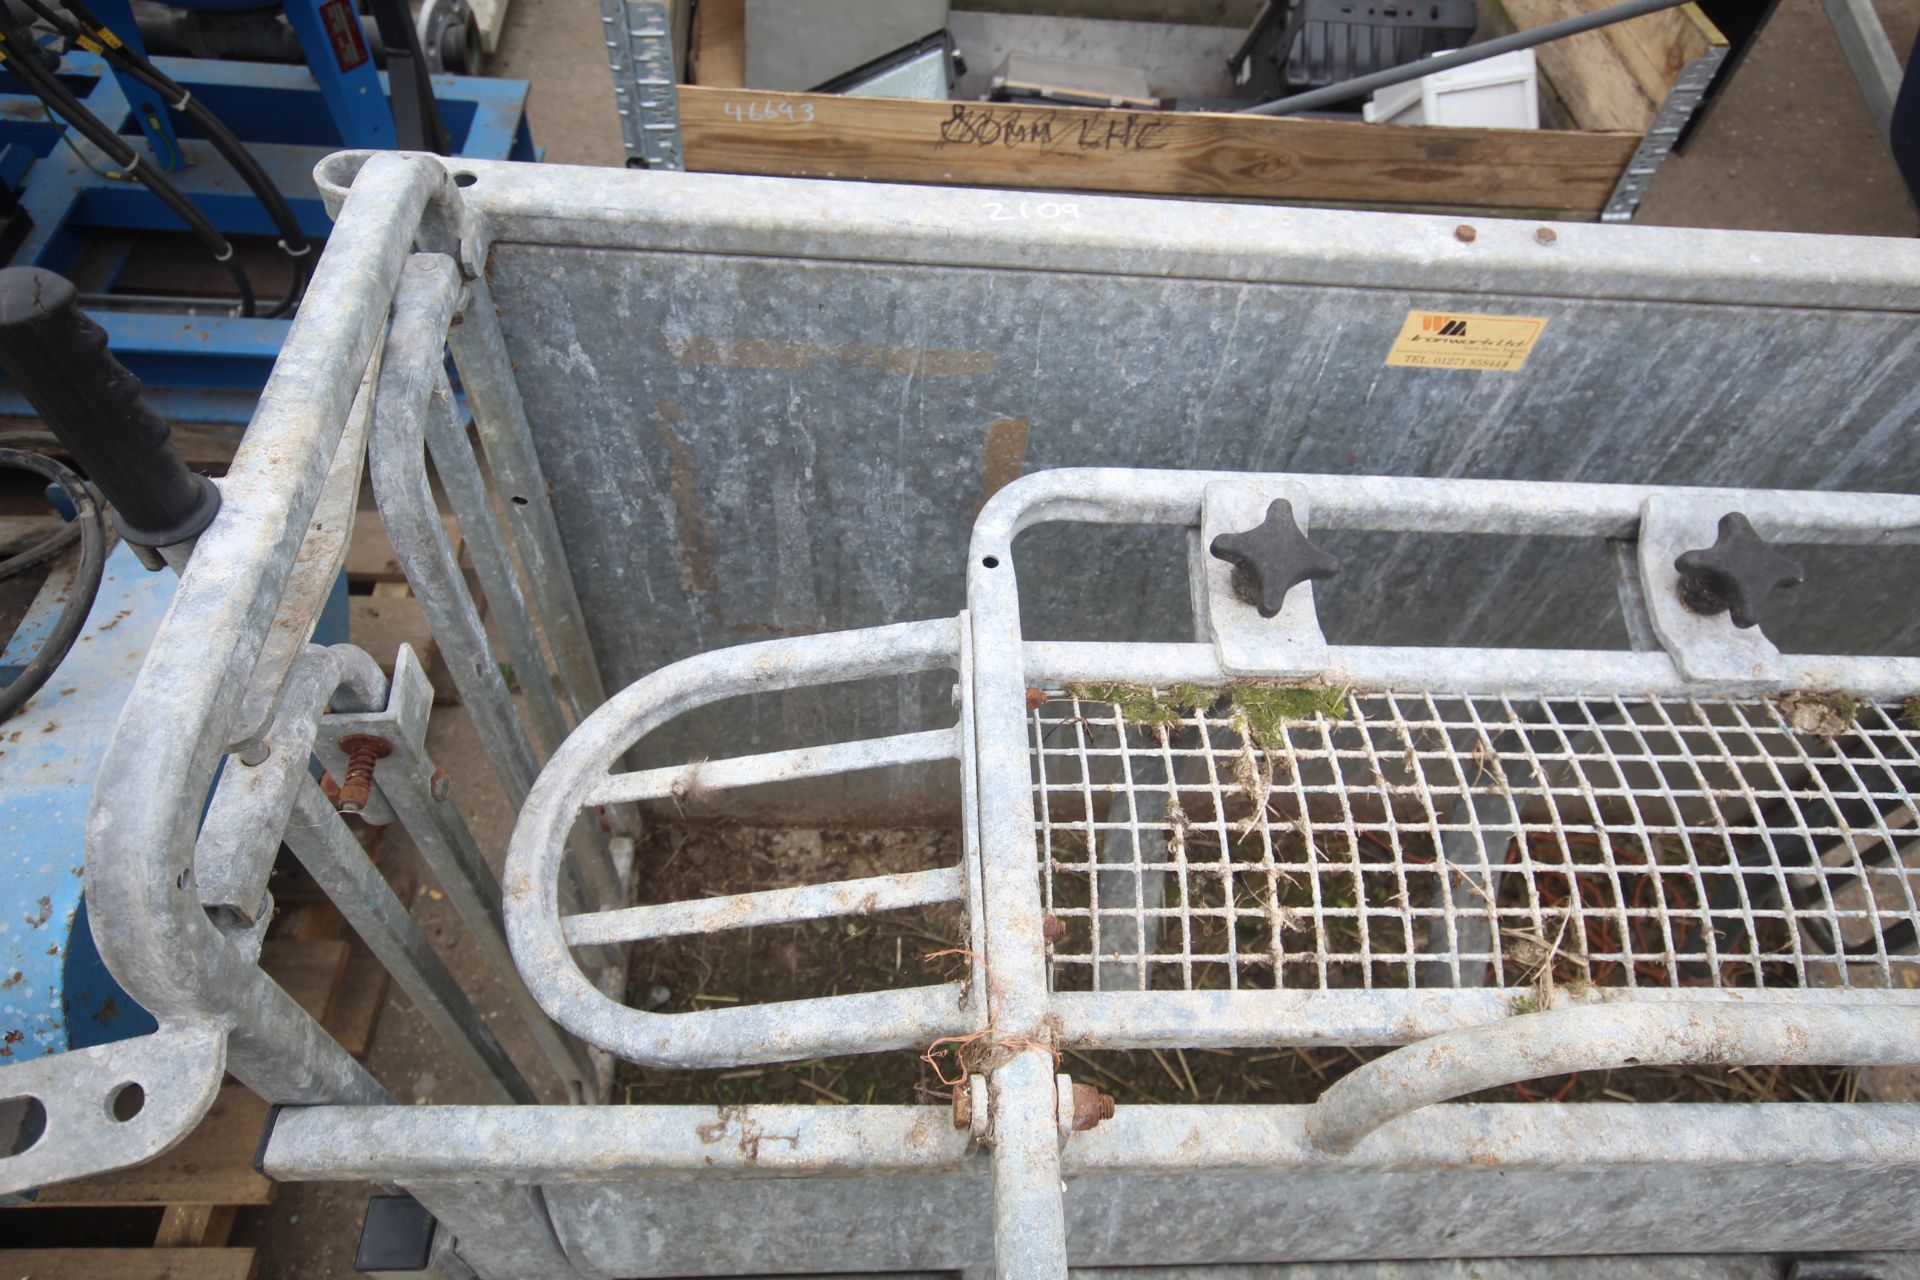 Sheep roll over crate. - Image 3 of 10